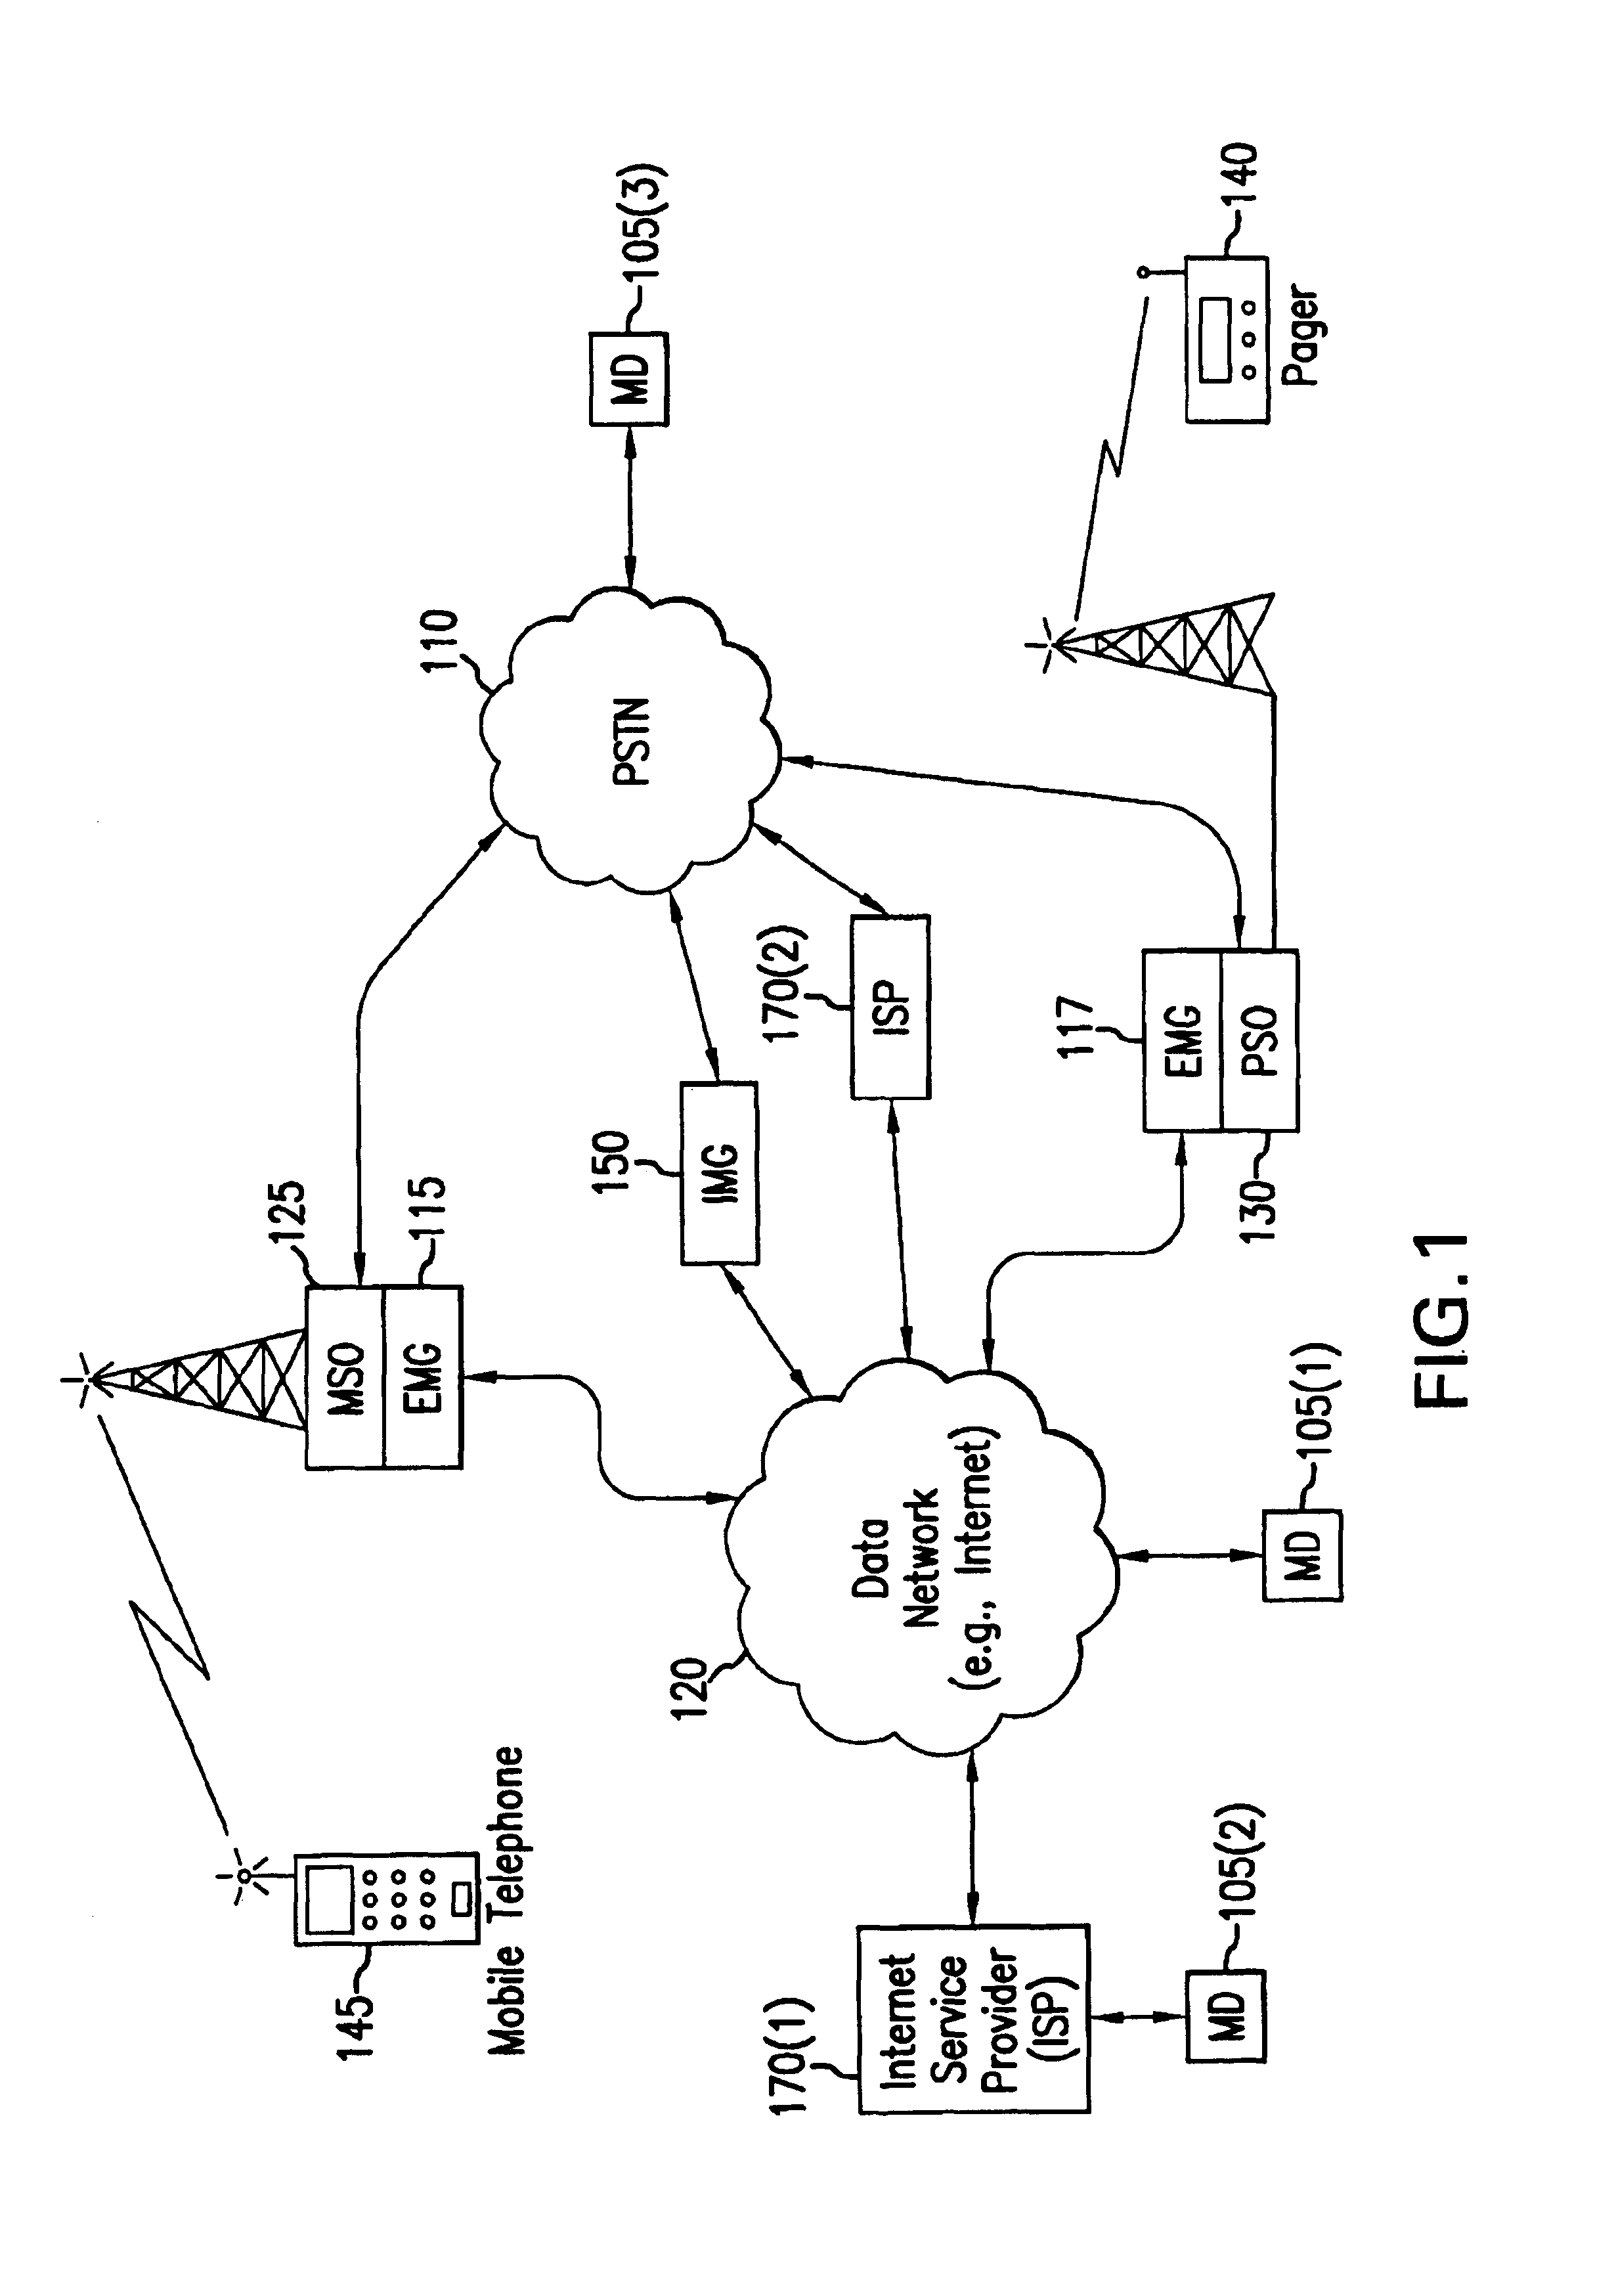 System and method for integrating audio and visual messaging